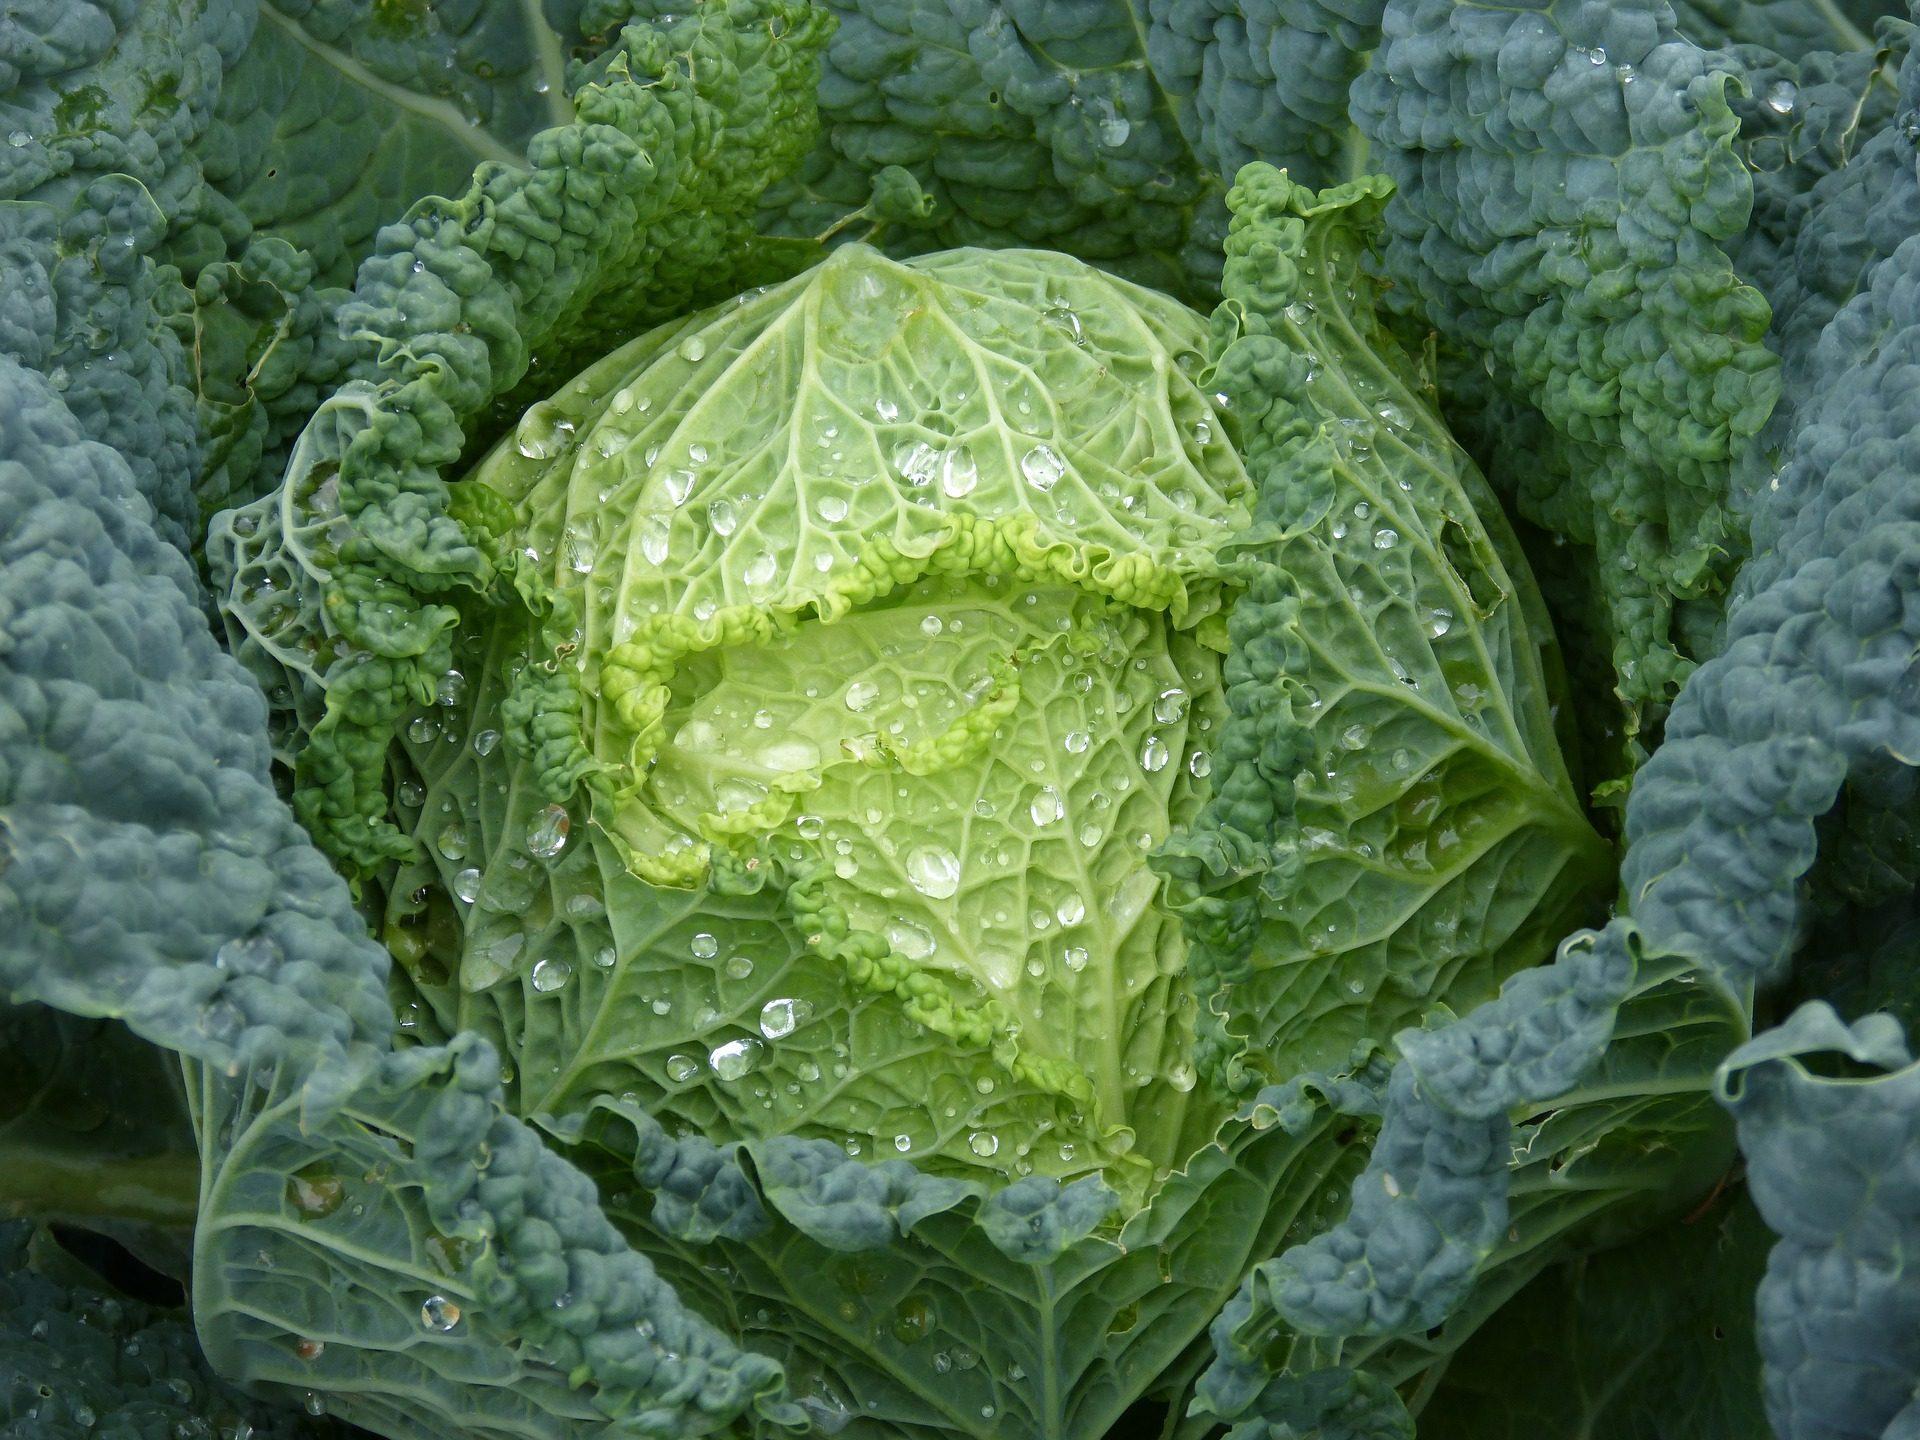 Cabbage Wallpaper Full HD Free Image Download